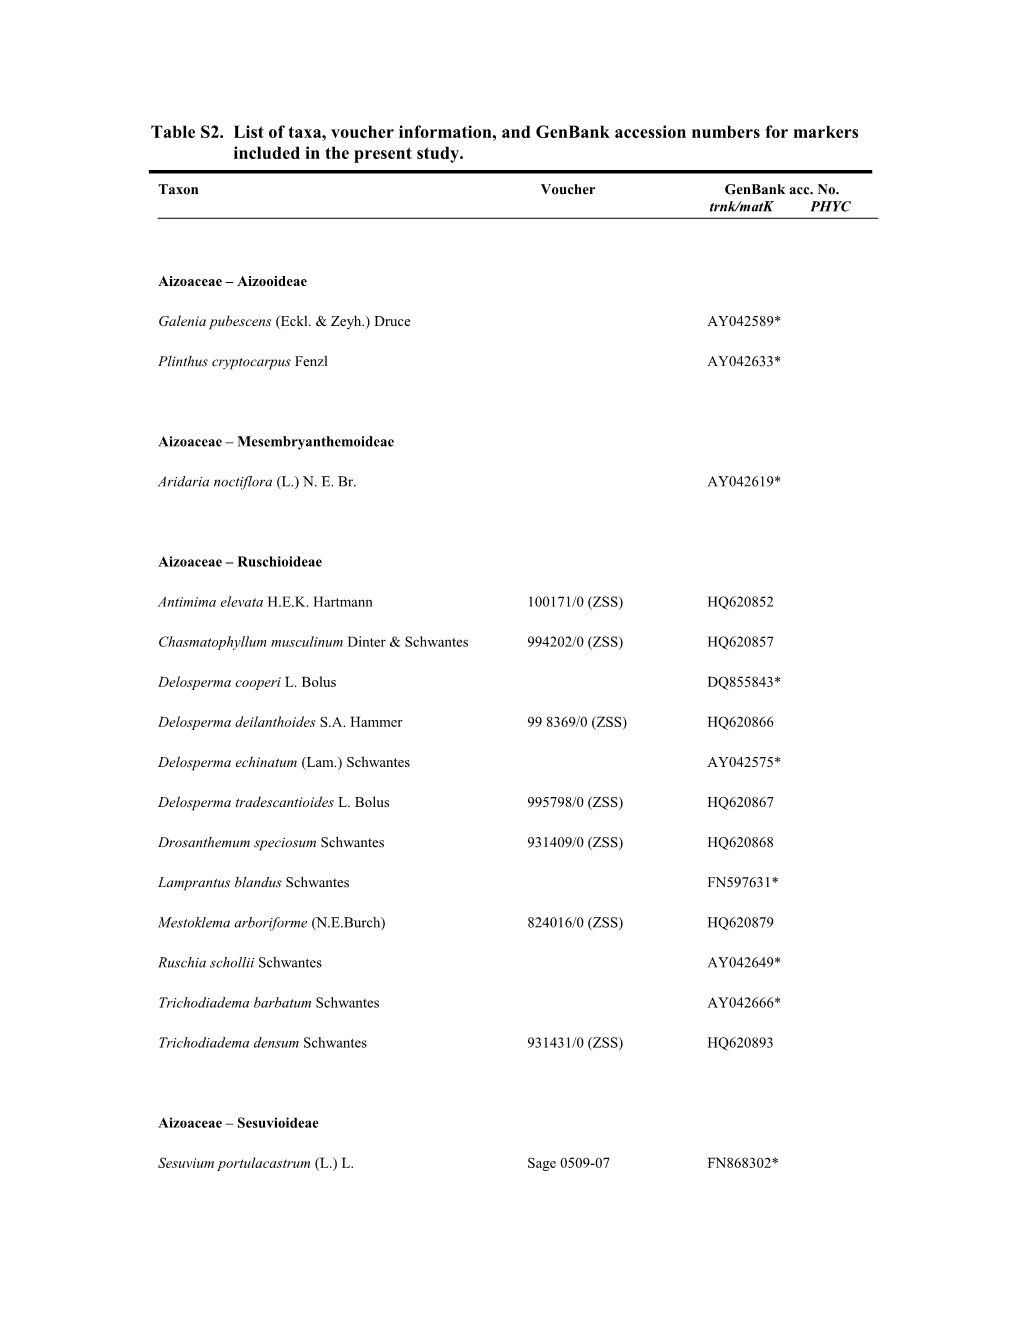 Table S2. List of Taxa, Voucher Information, and Genbank Accession Numbers for Markers